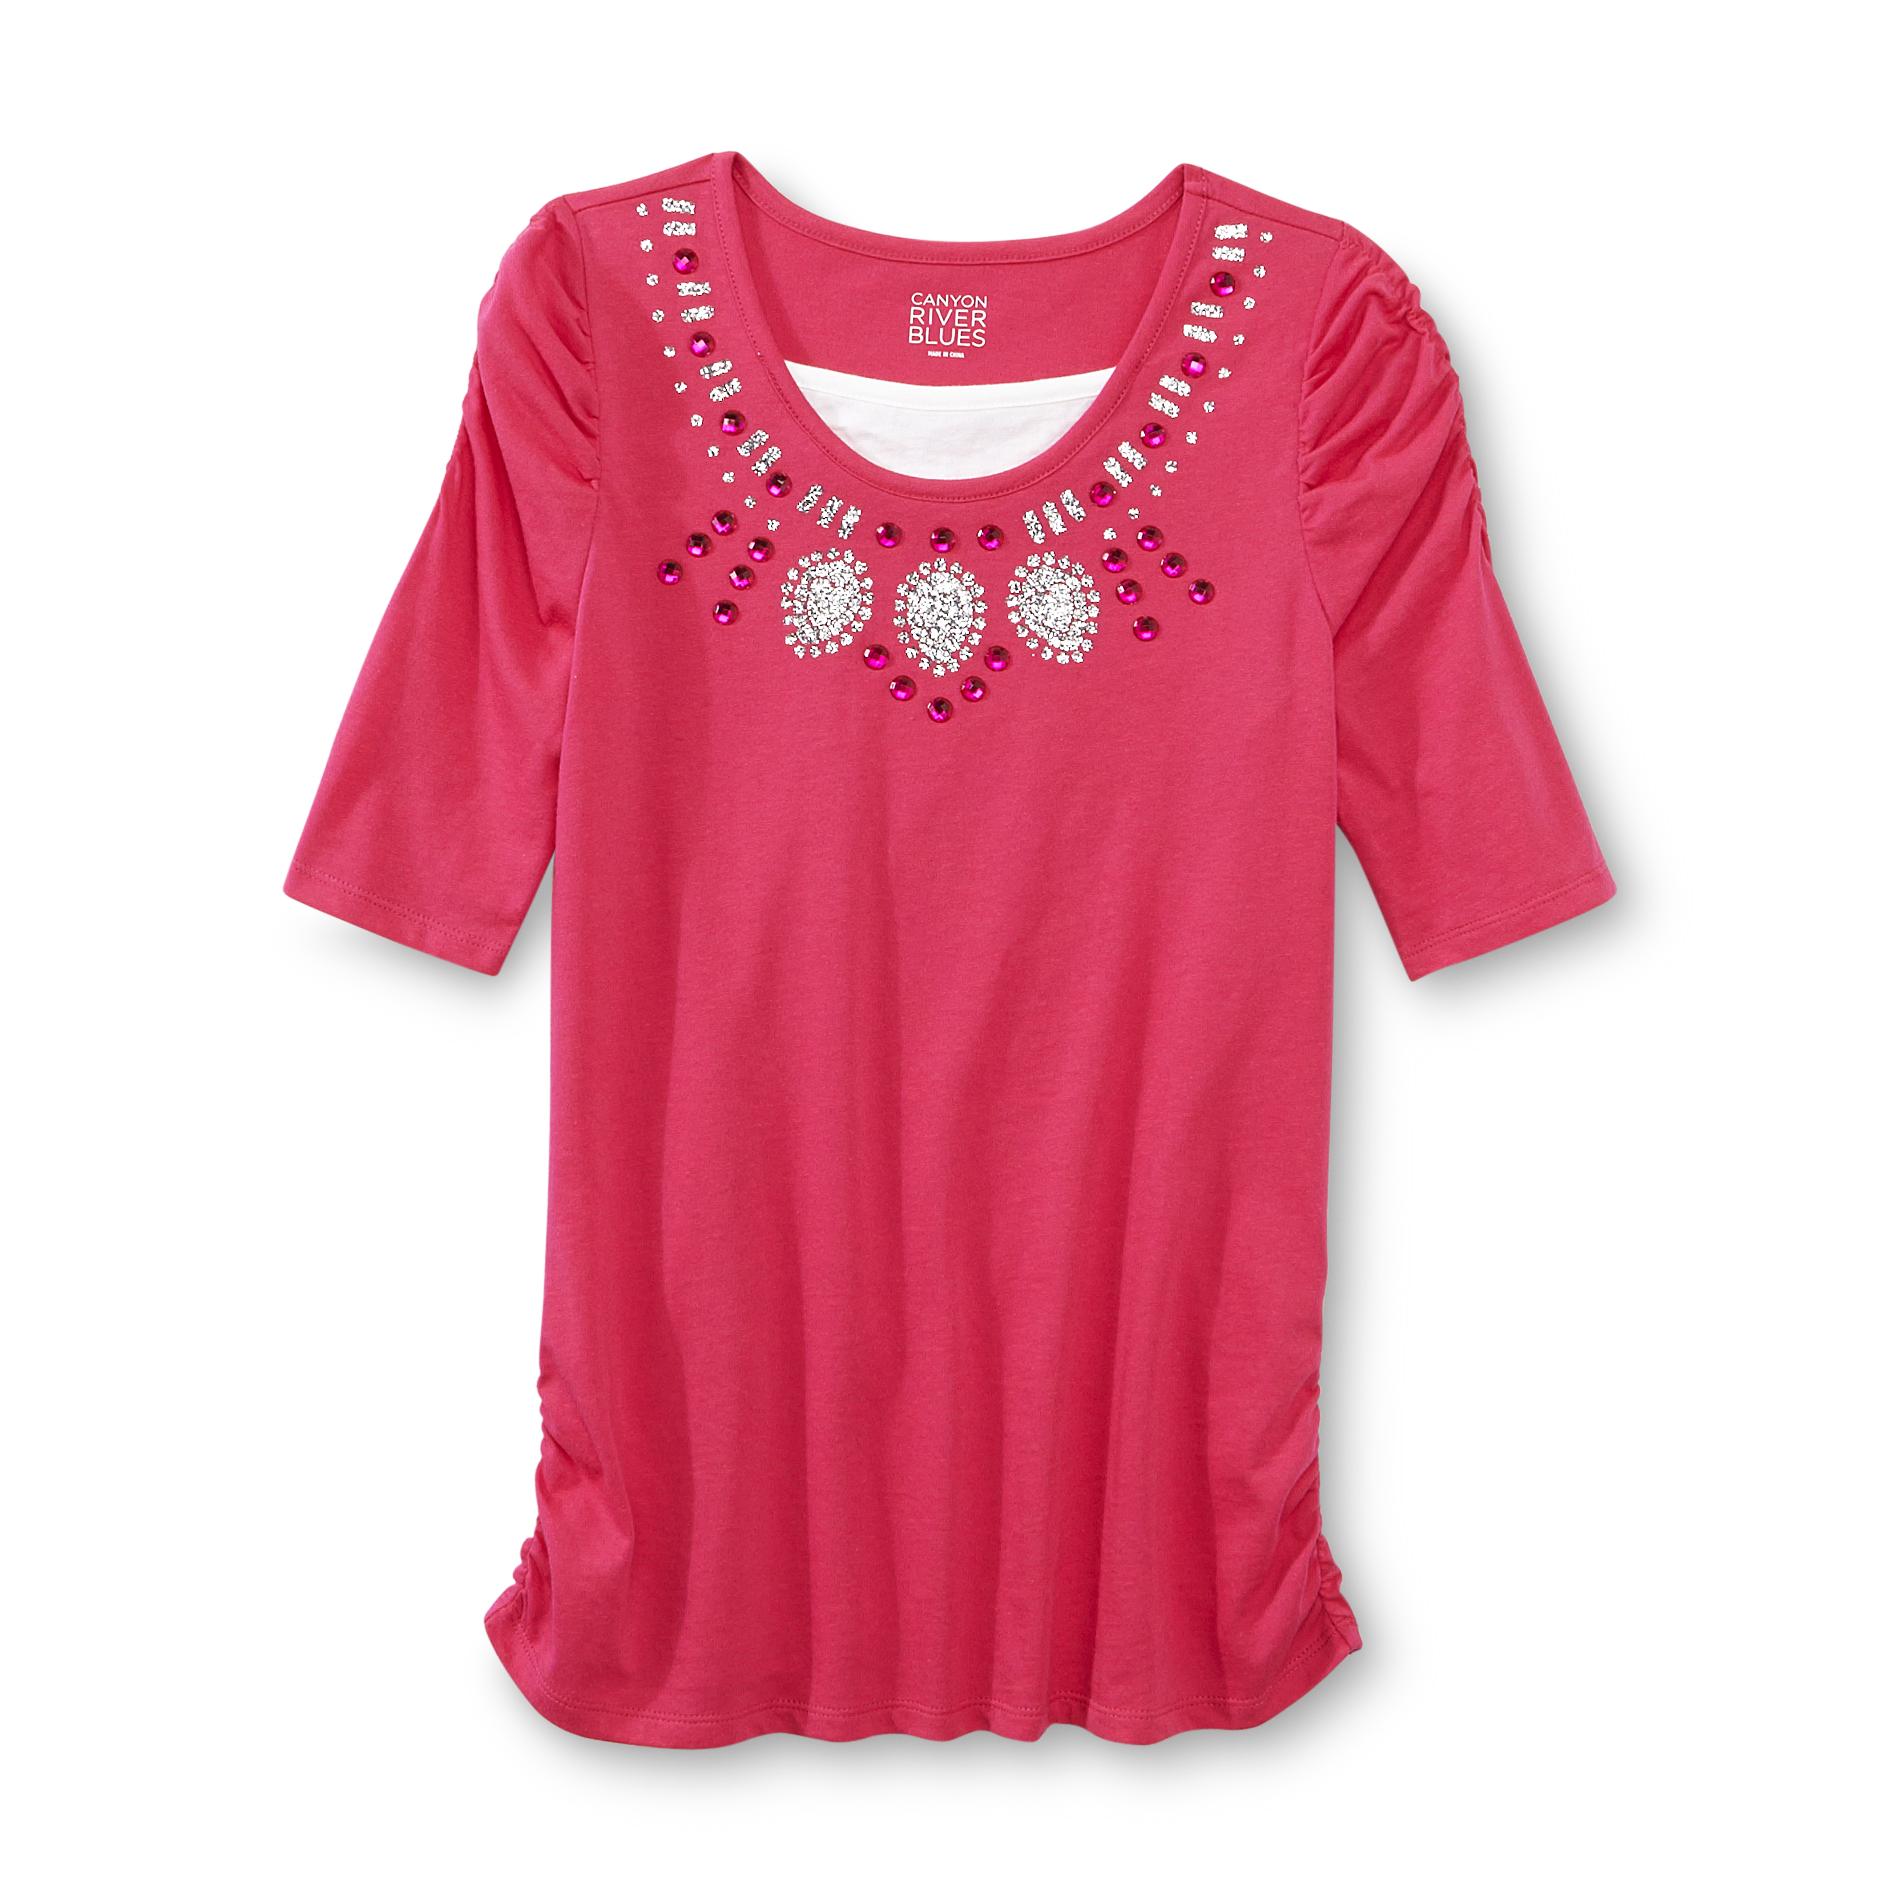 Canyon River Blues Girl's Embellished Layered Look Shirt